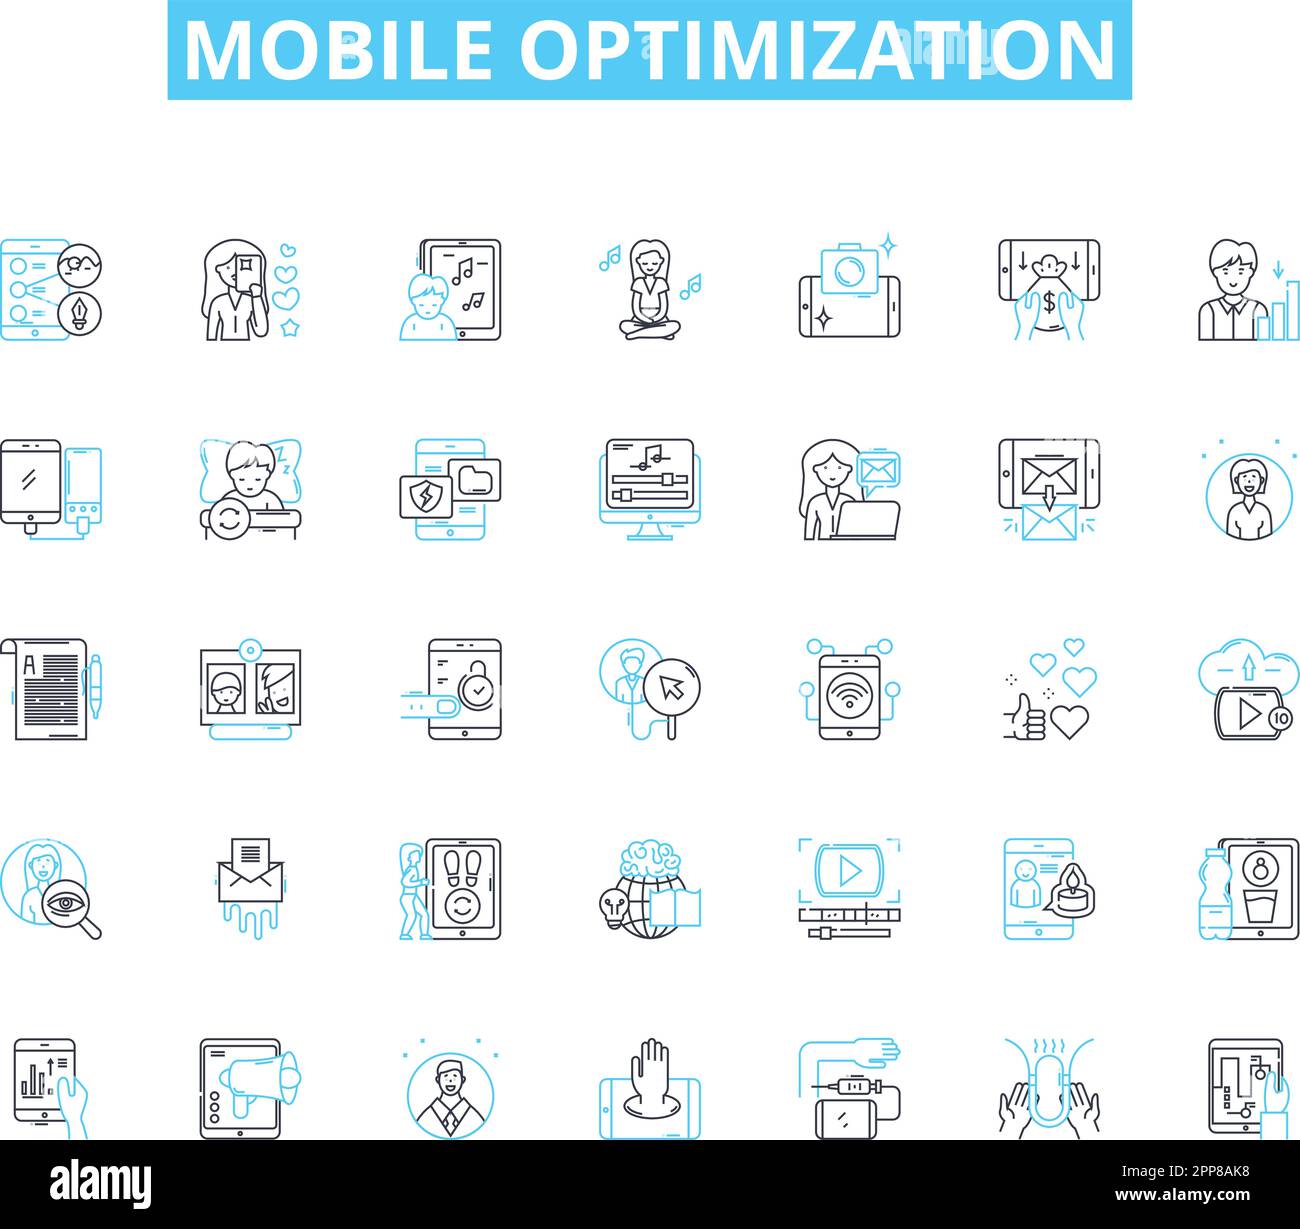 Mobile optimization linear icons set. Responsiveness, Compatibility, Adaptability, Streamlining, Efficiency, Accessibility, User-friendliness line Stock Vector